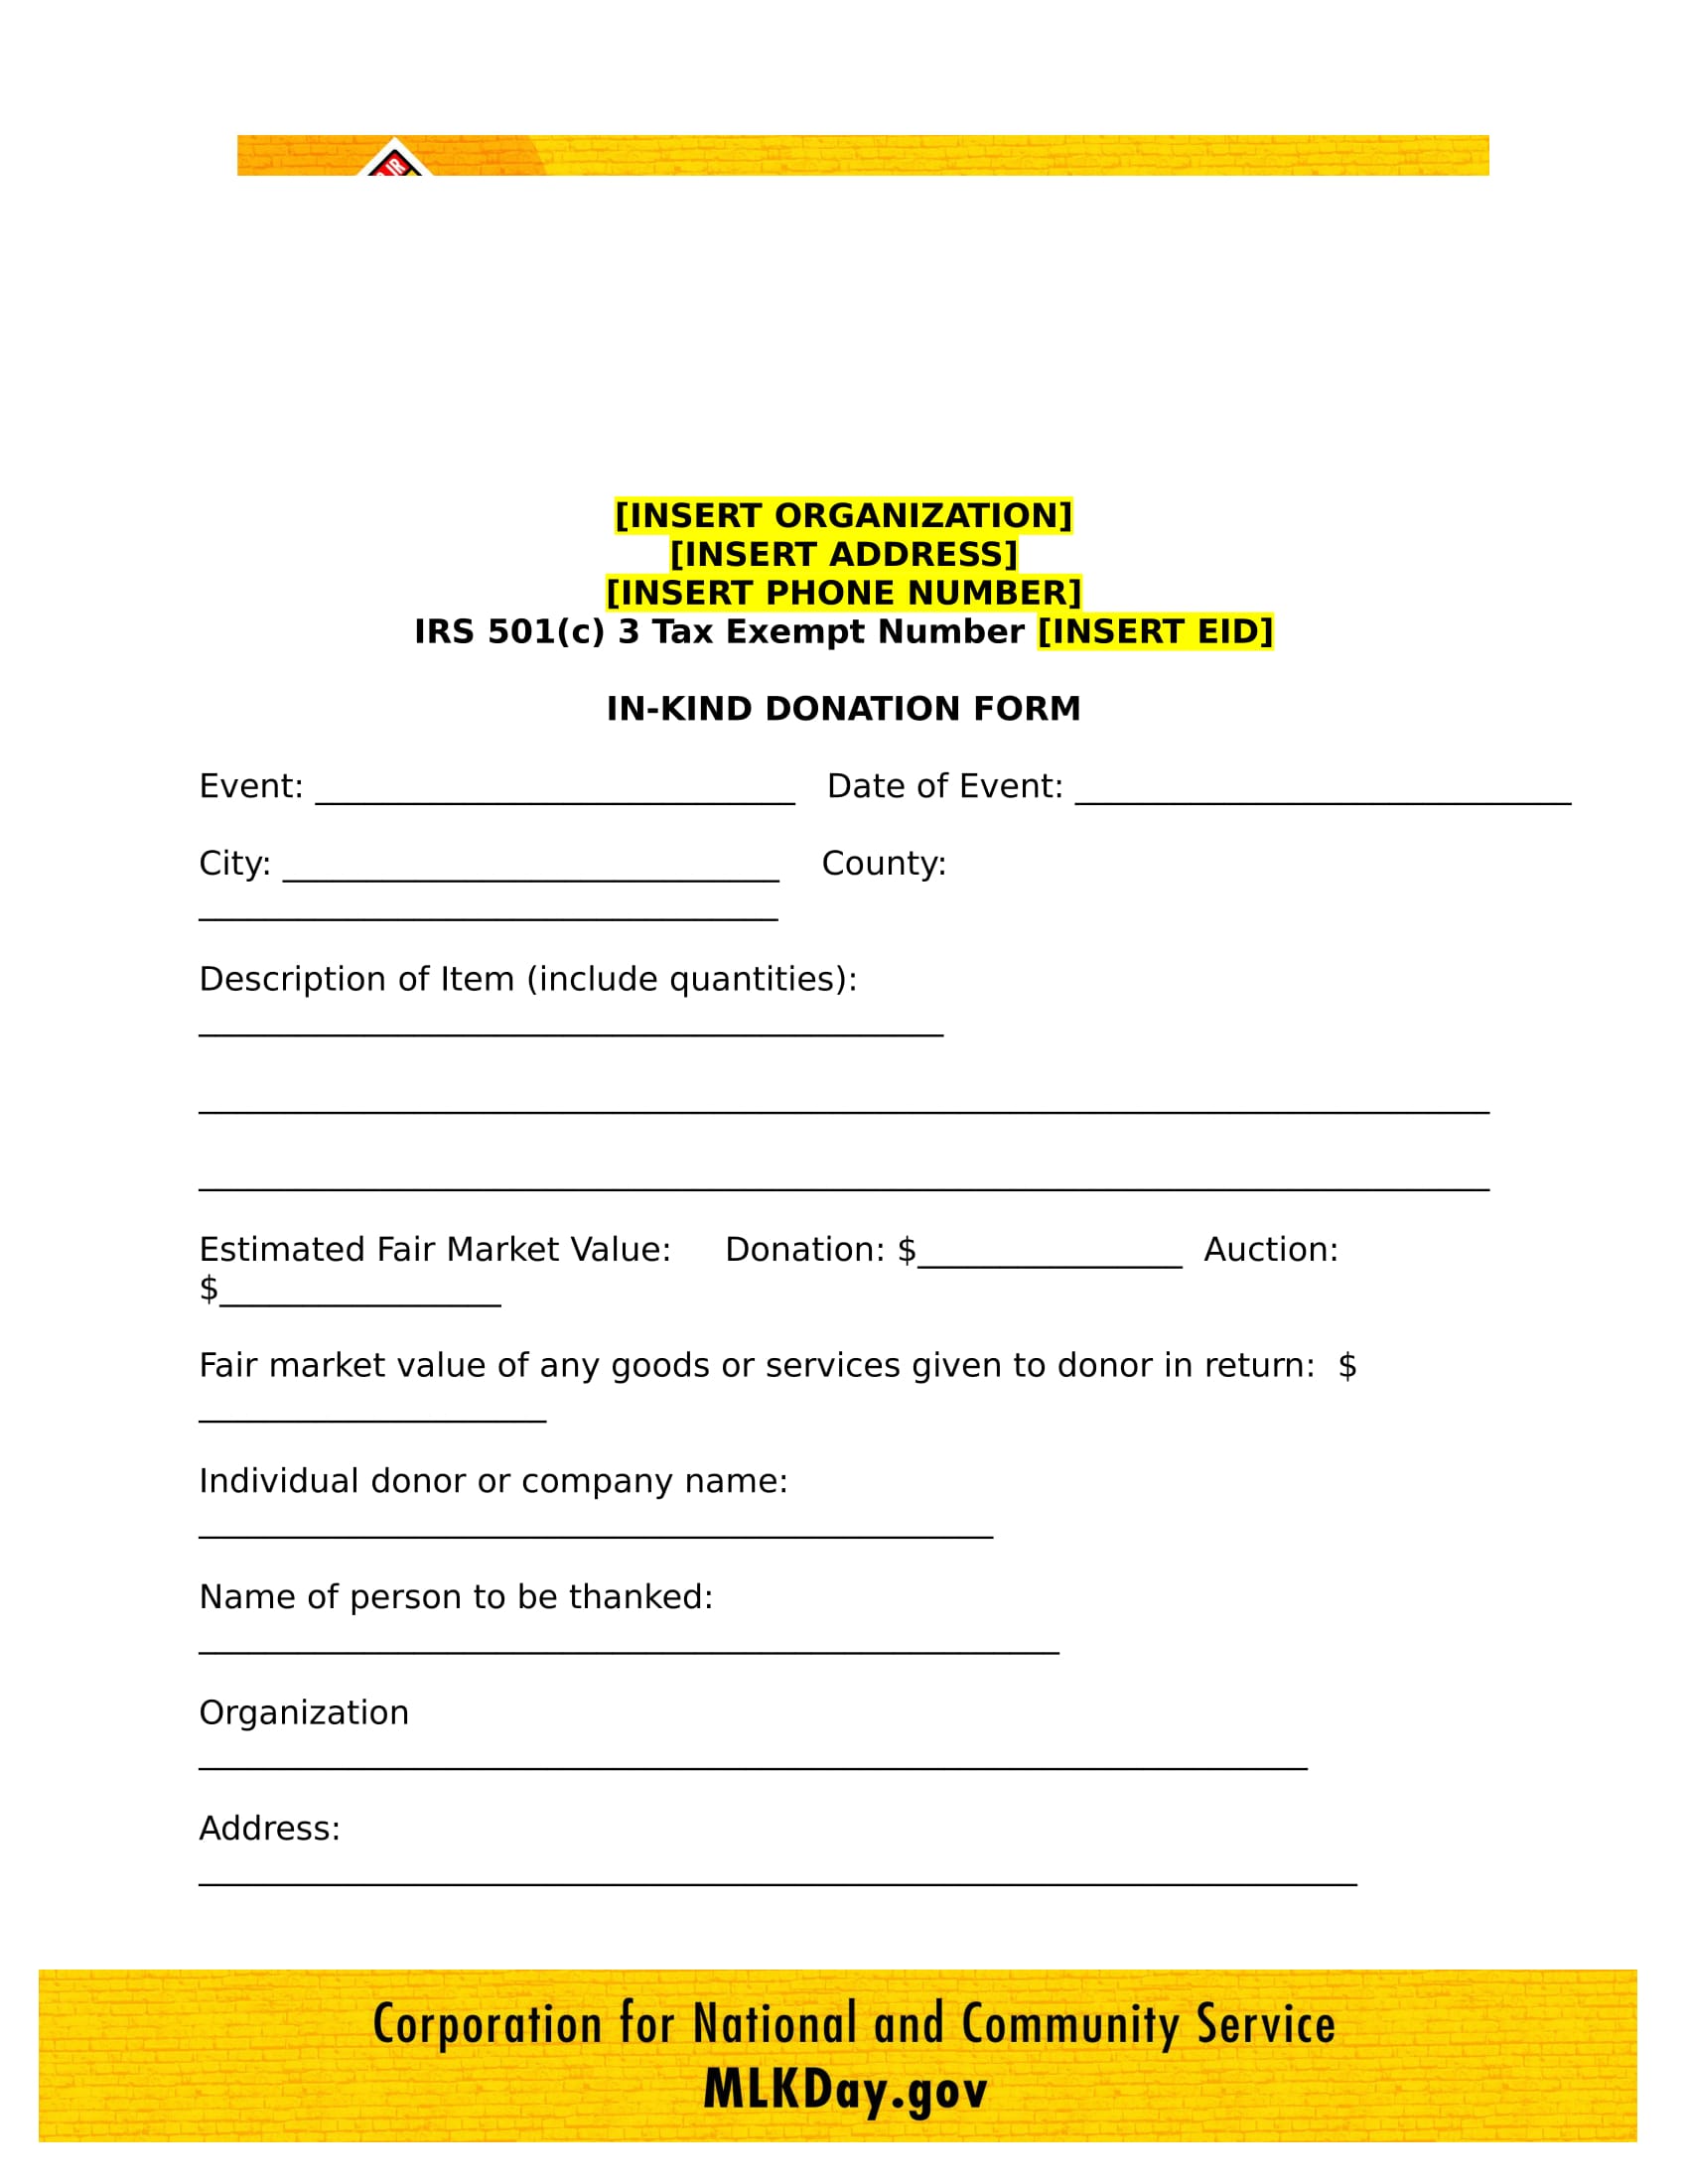 non profit in kind donation form in doc 1